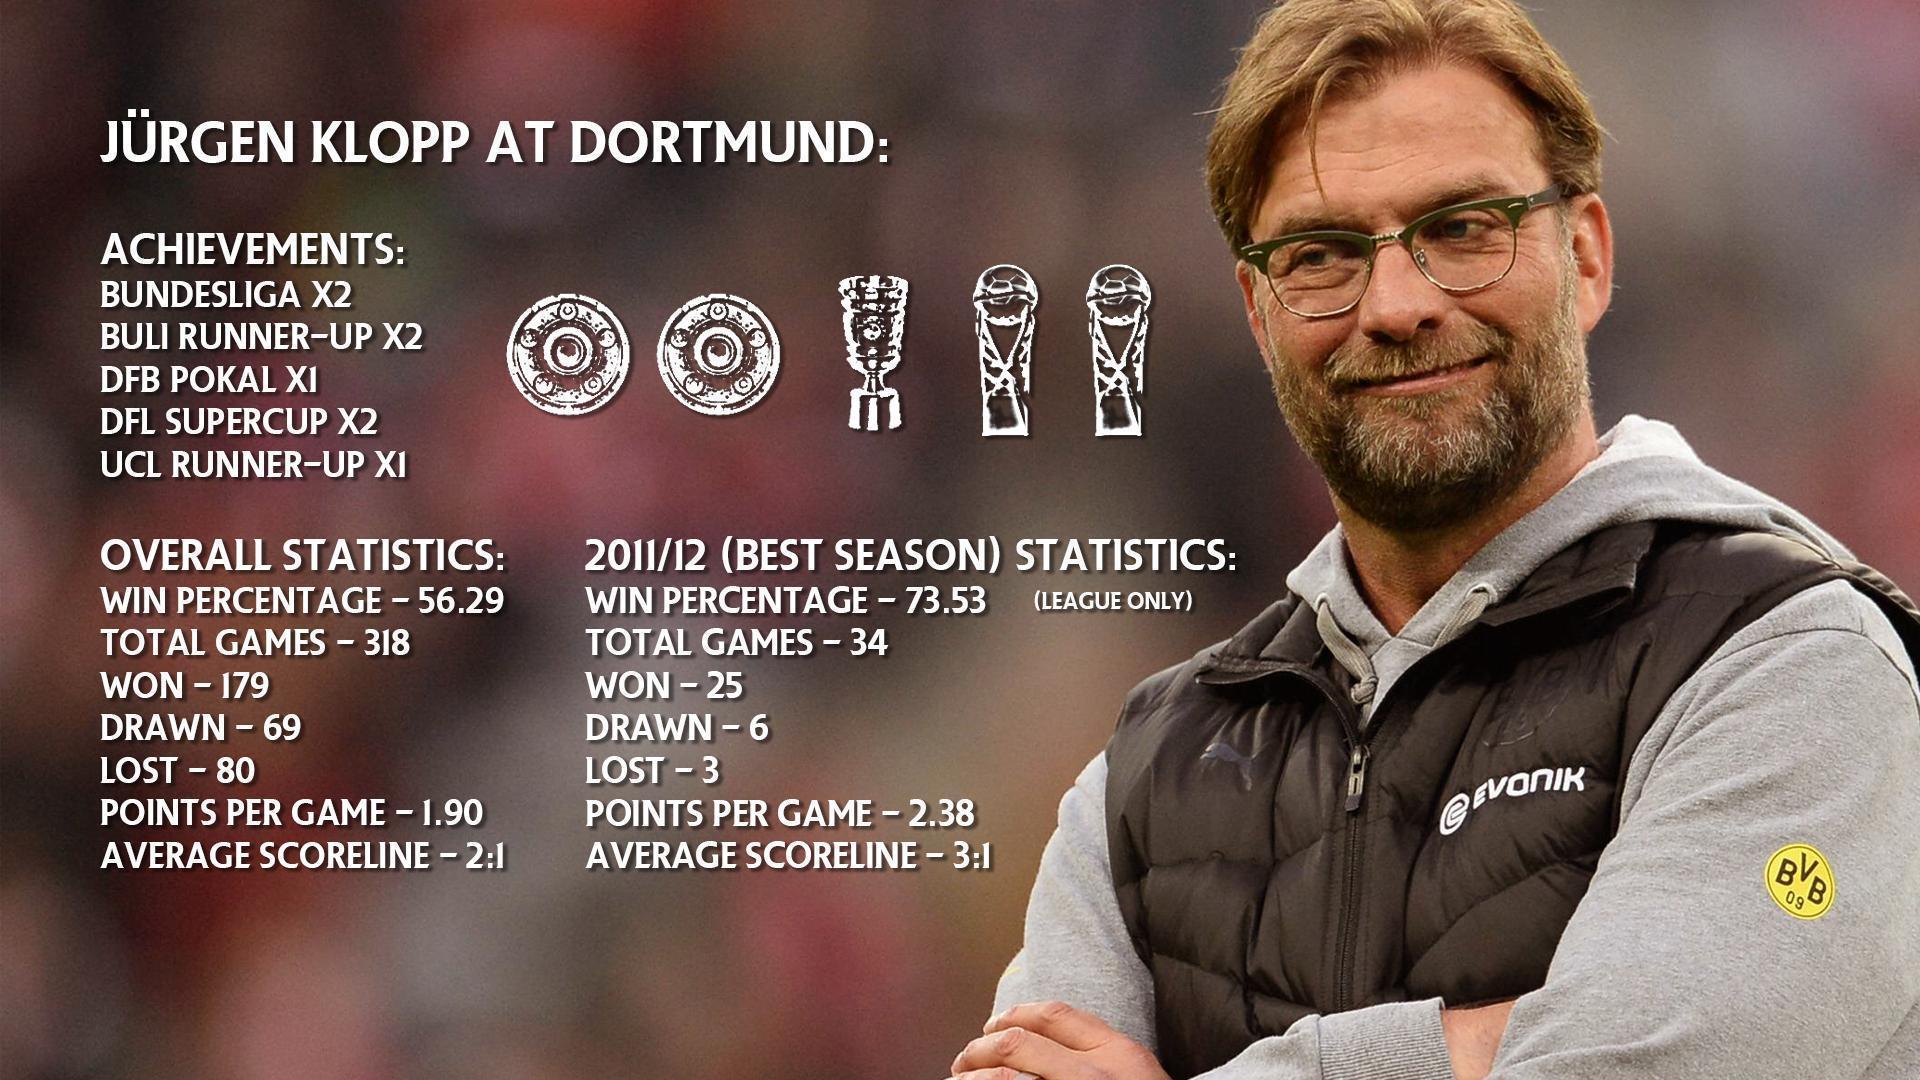 As Jürgen Klopp looks more and more set to become our next manager